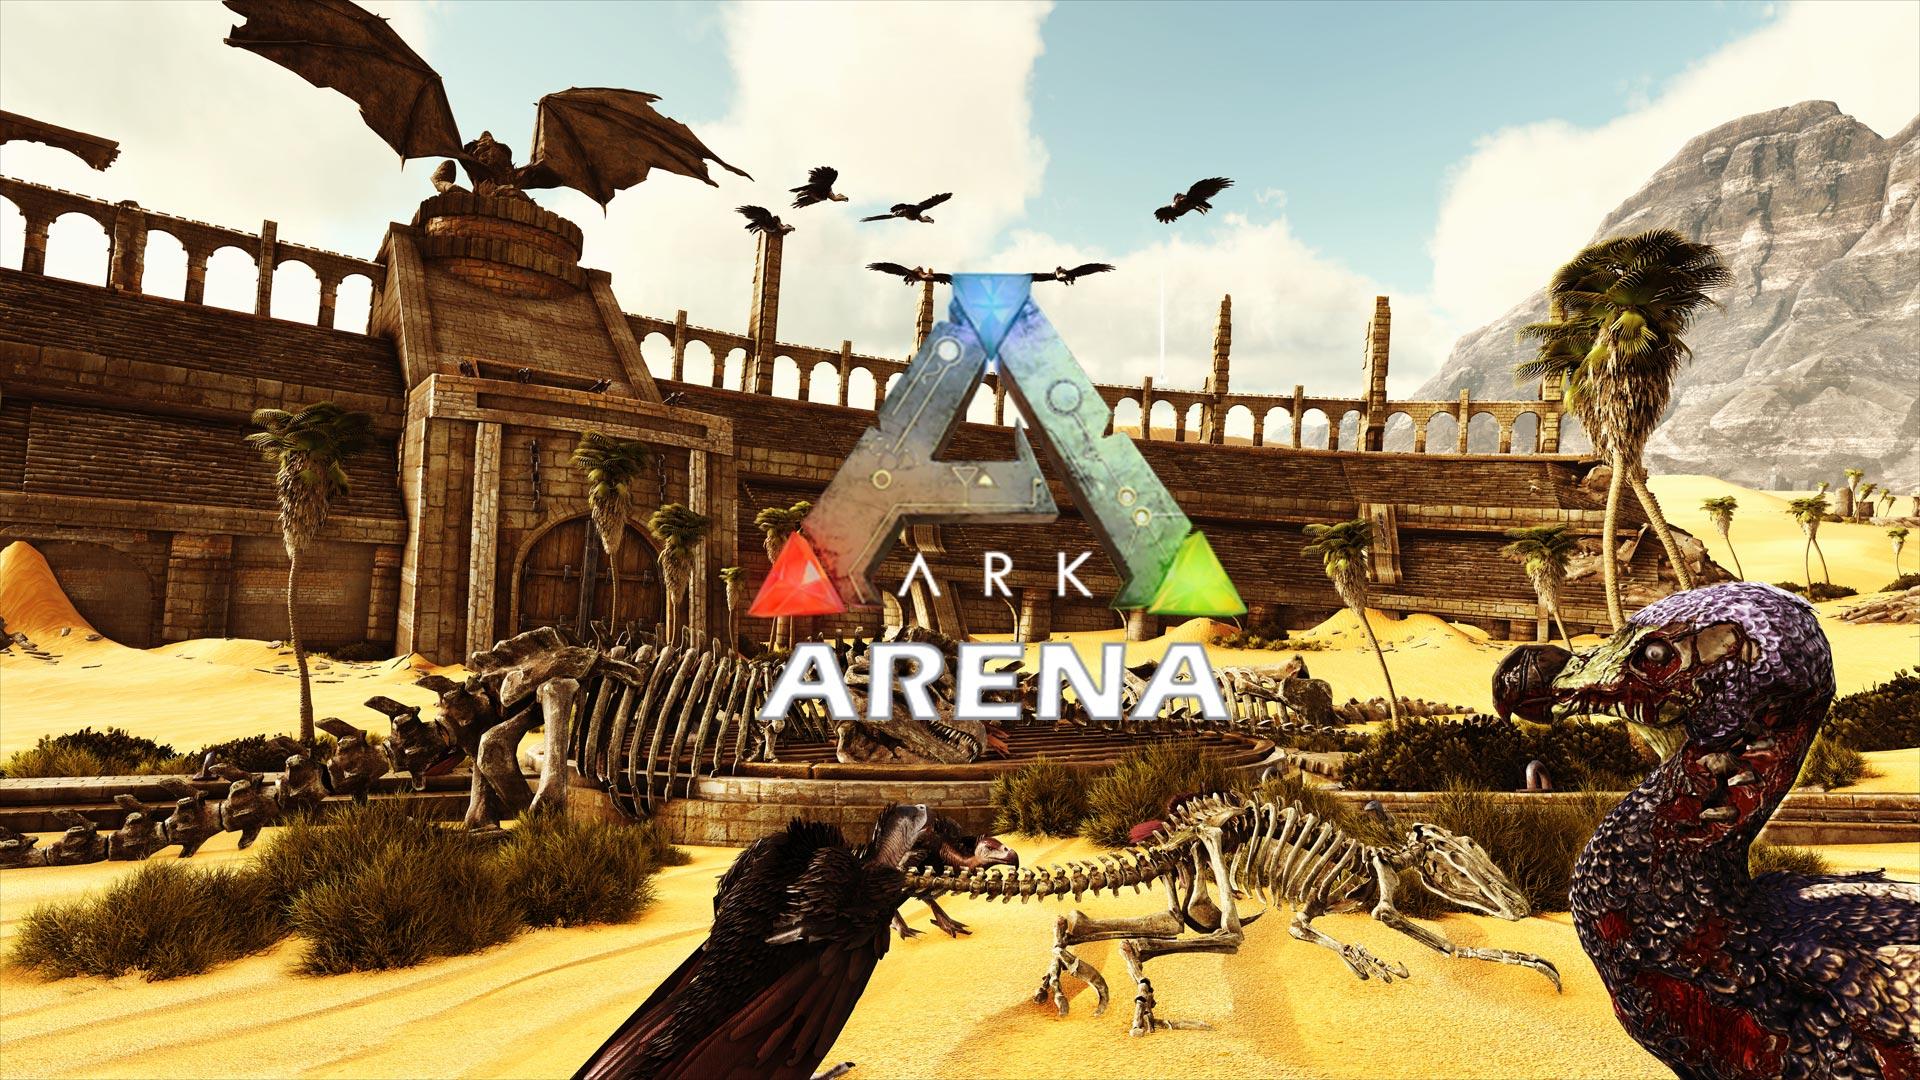 Ark scorched. Scorched Earth АРК. АРК пустыня. Ark Survival пустыня. Арена Ark Scorched Earth.